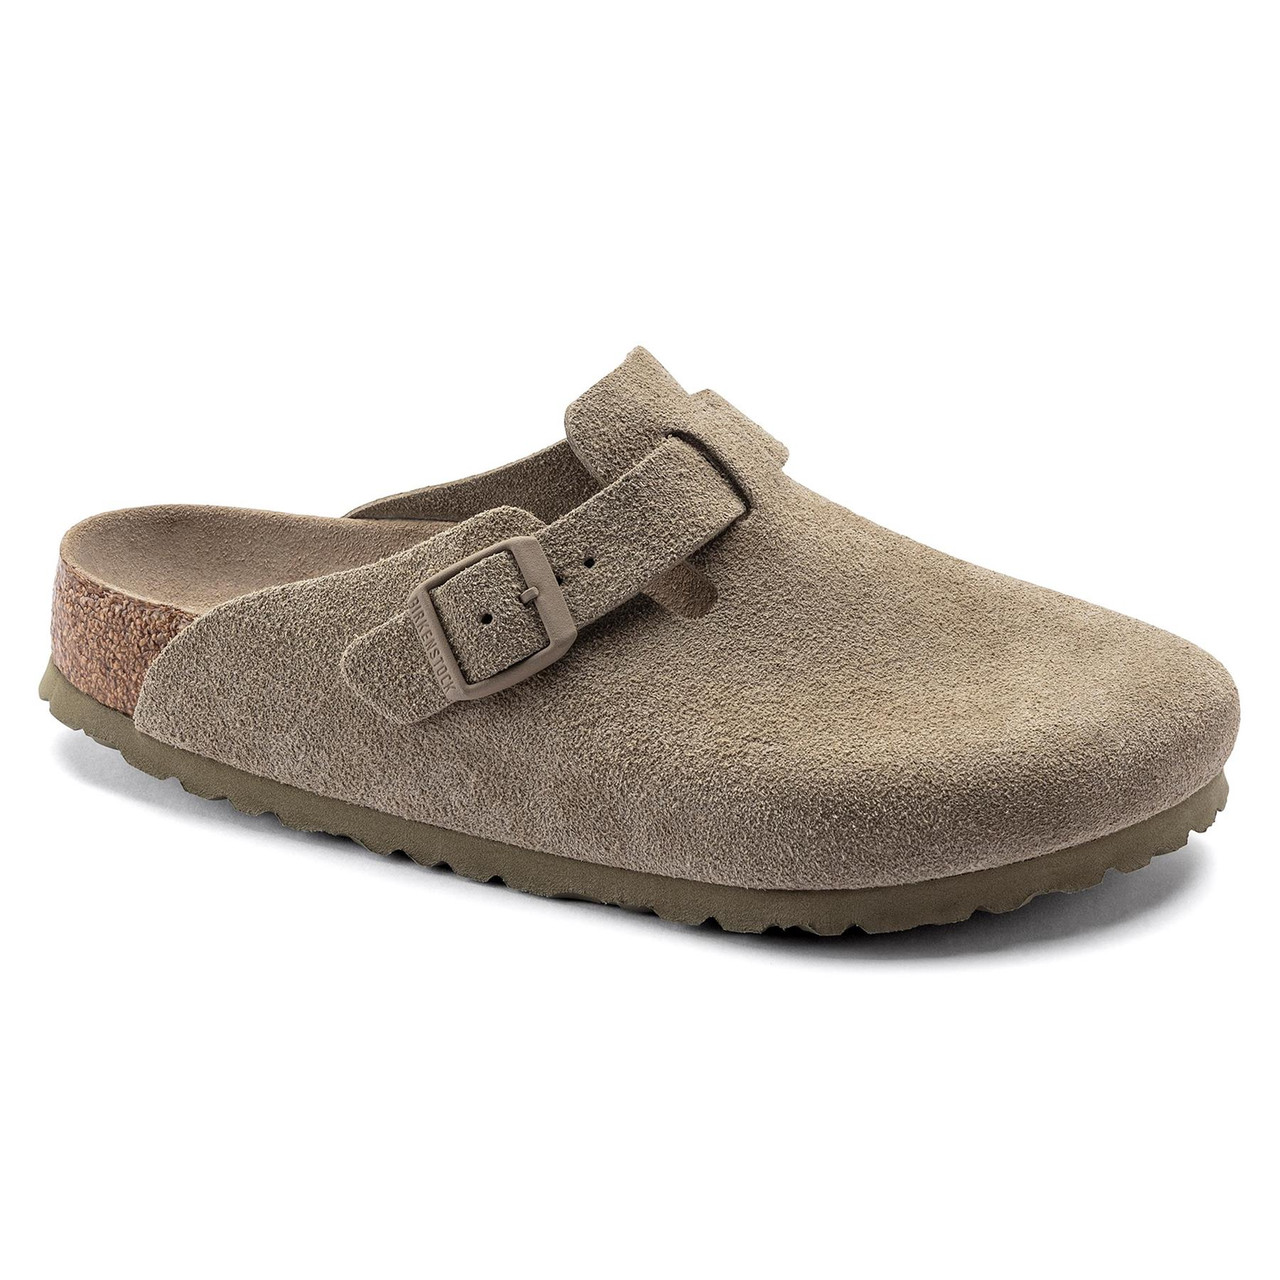 Birkenstock Unisex Boston Soft Footbed Suede Leather Clog Questions & Answers